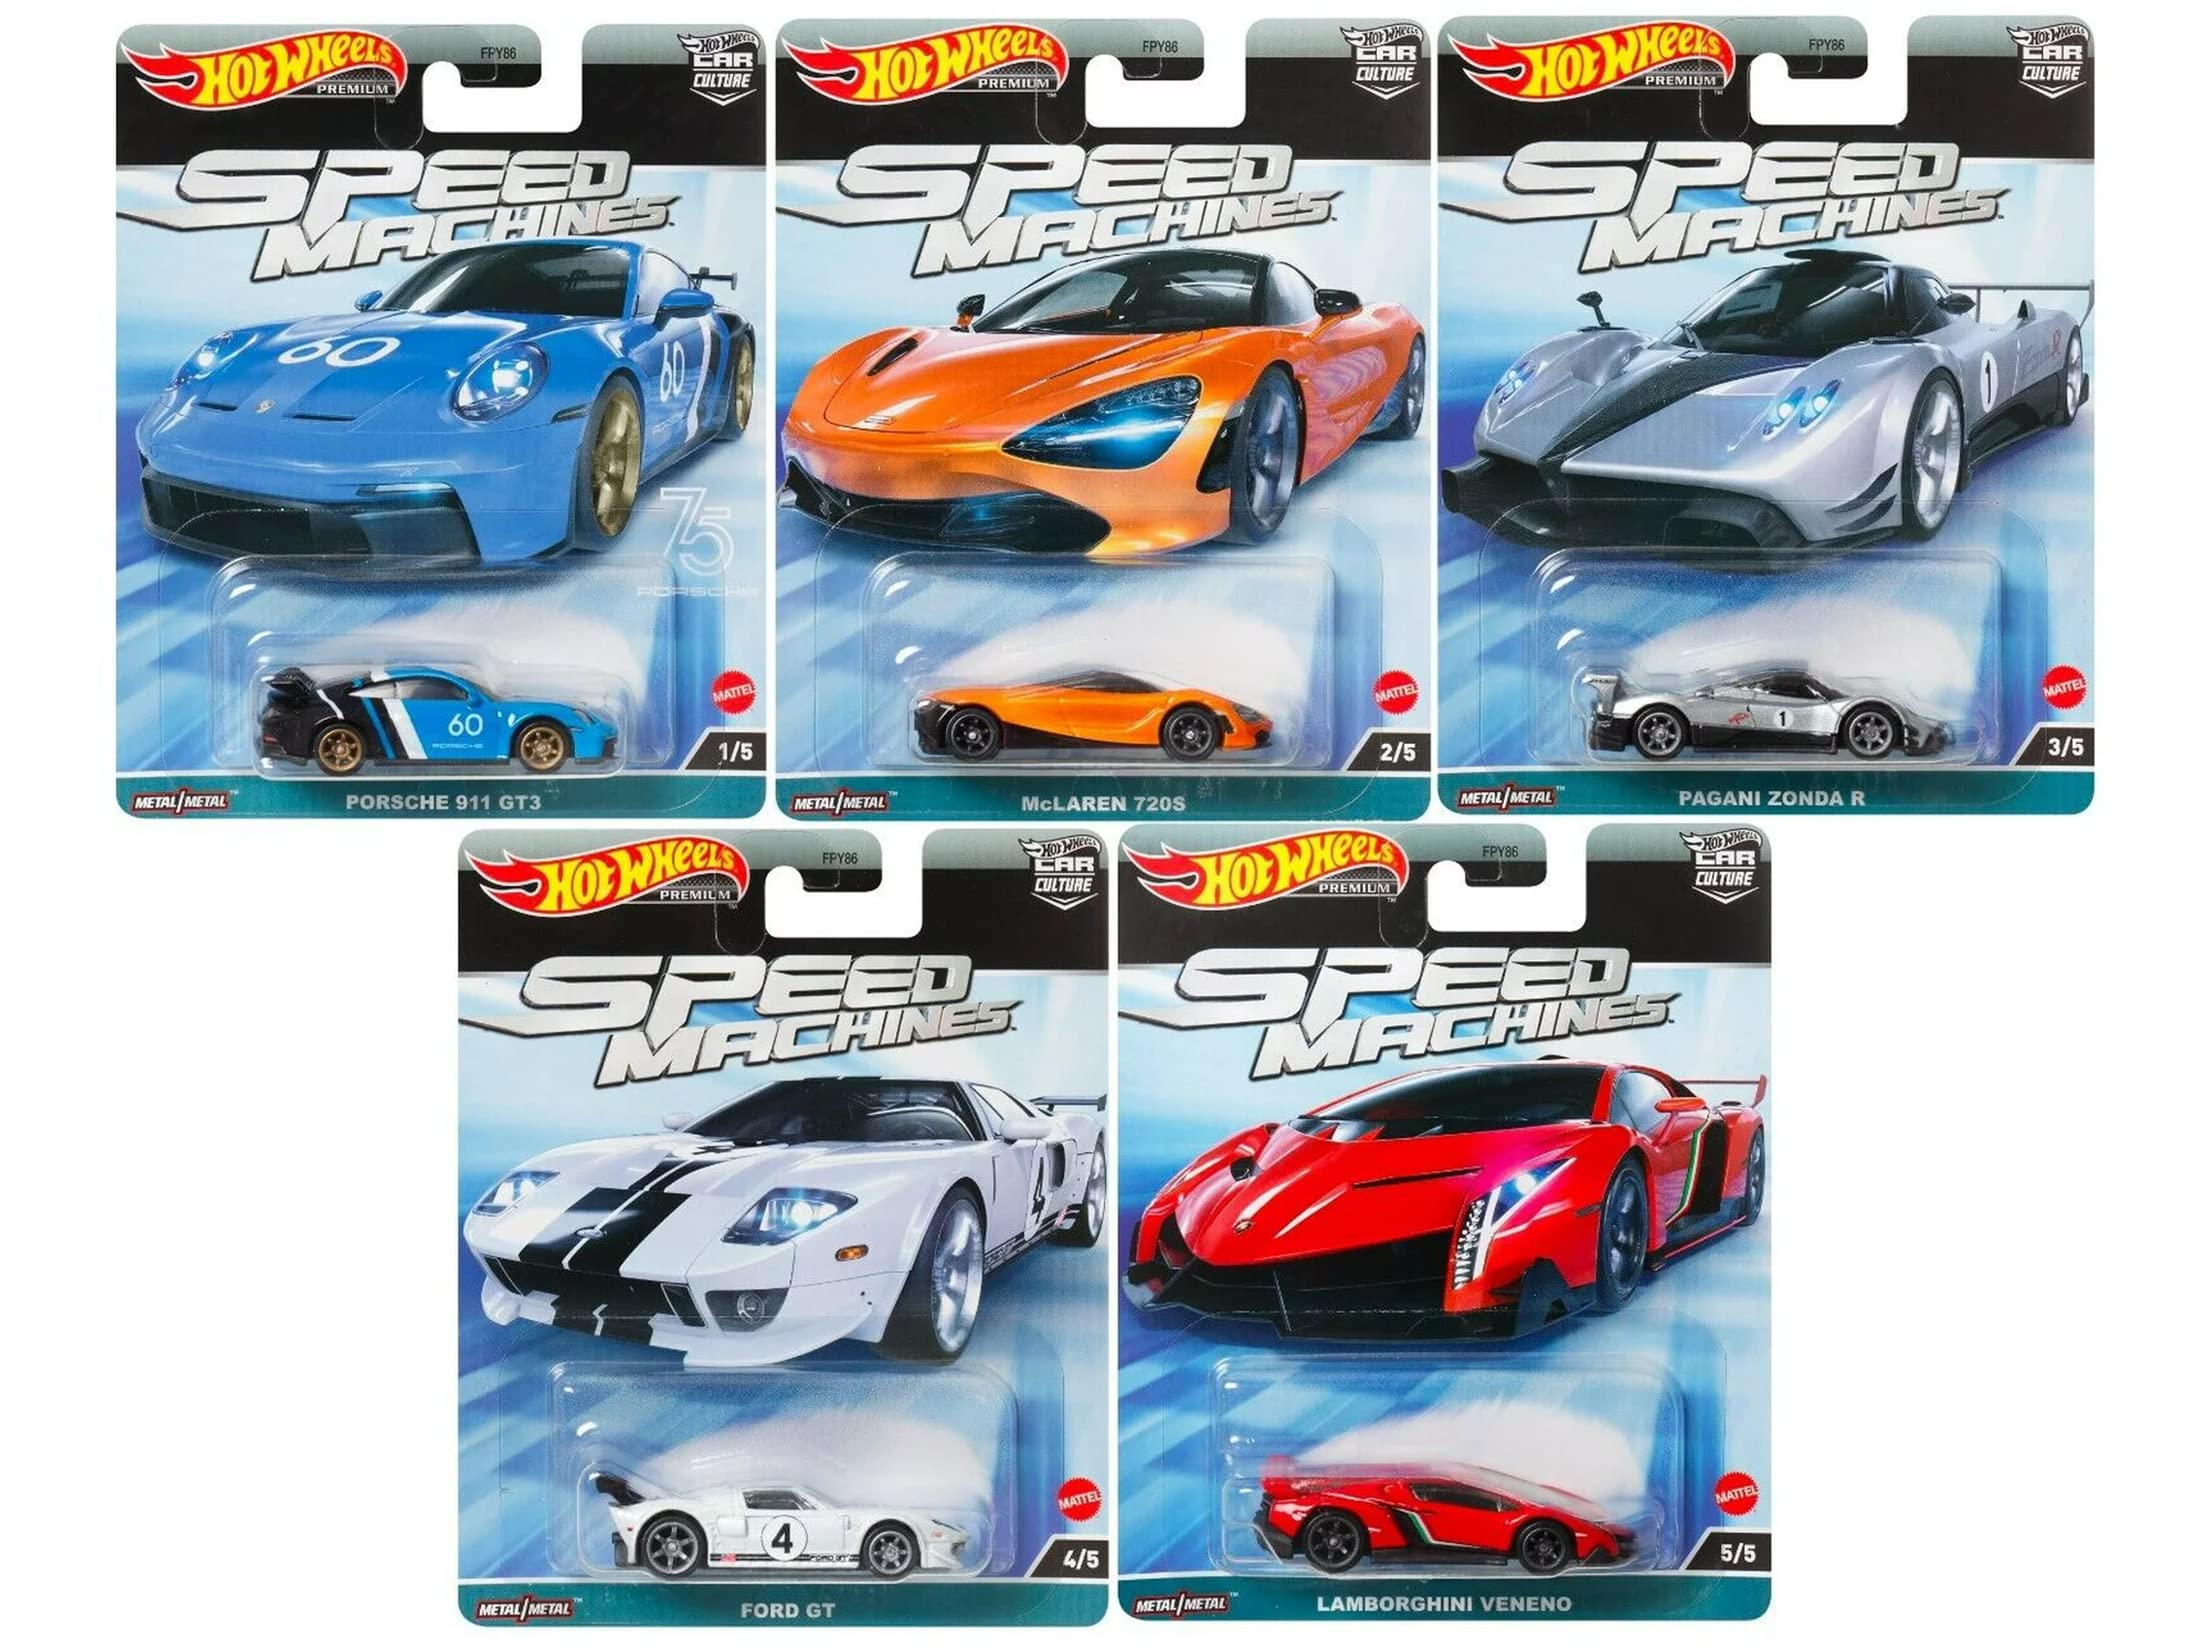 Hot Wheels Premium Car Culture Speed Machines 5-Pack in Collectible Container, Set of 5 Die-Cast 1:64 Scale Toy Cars